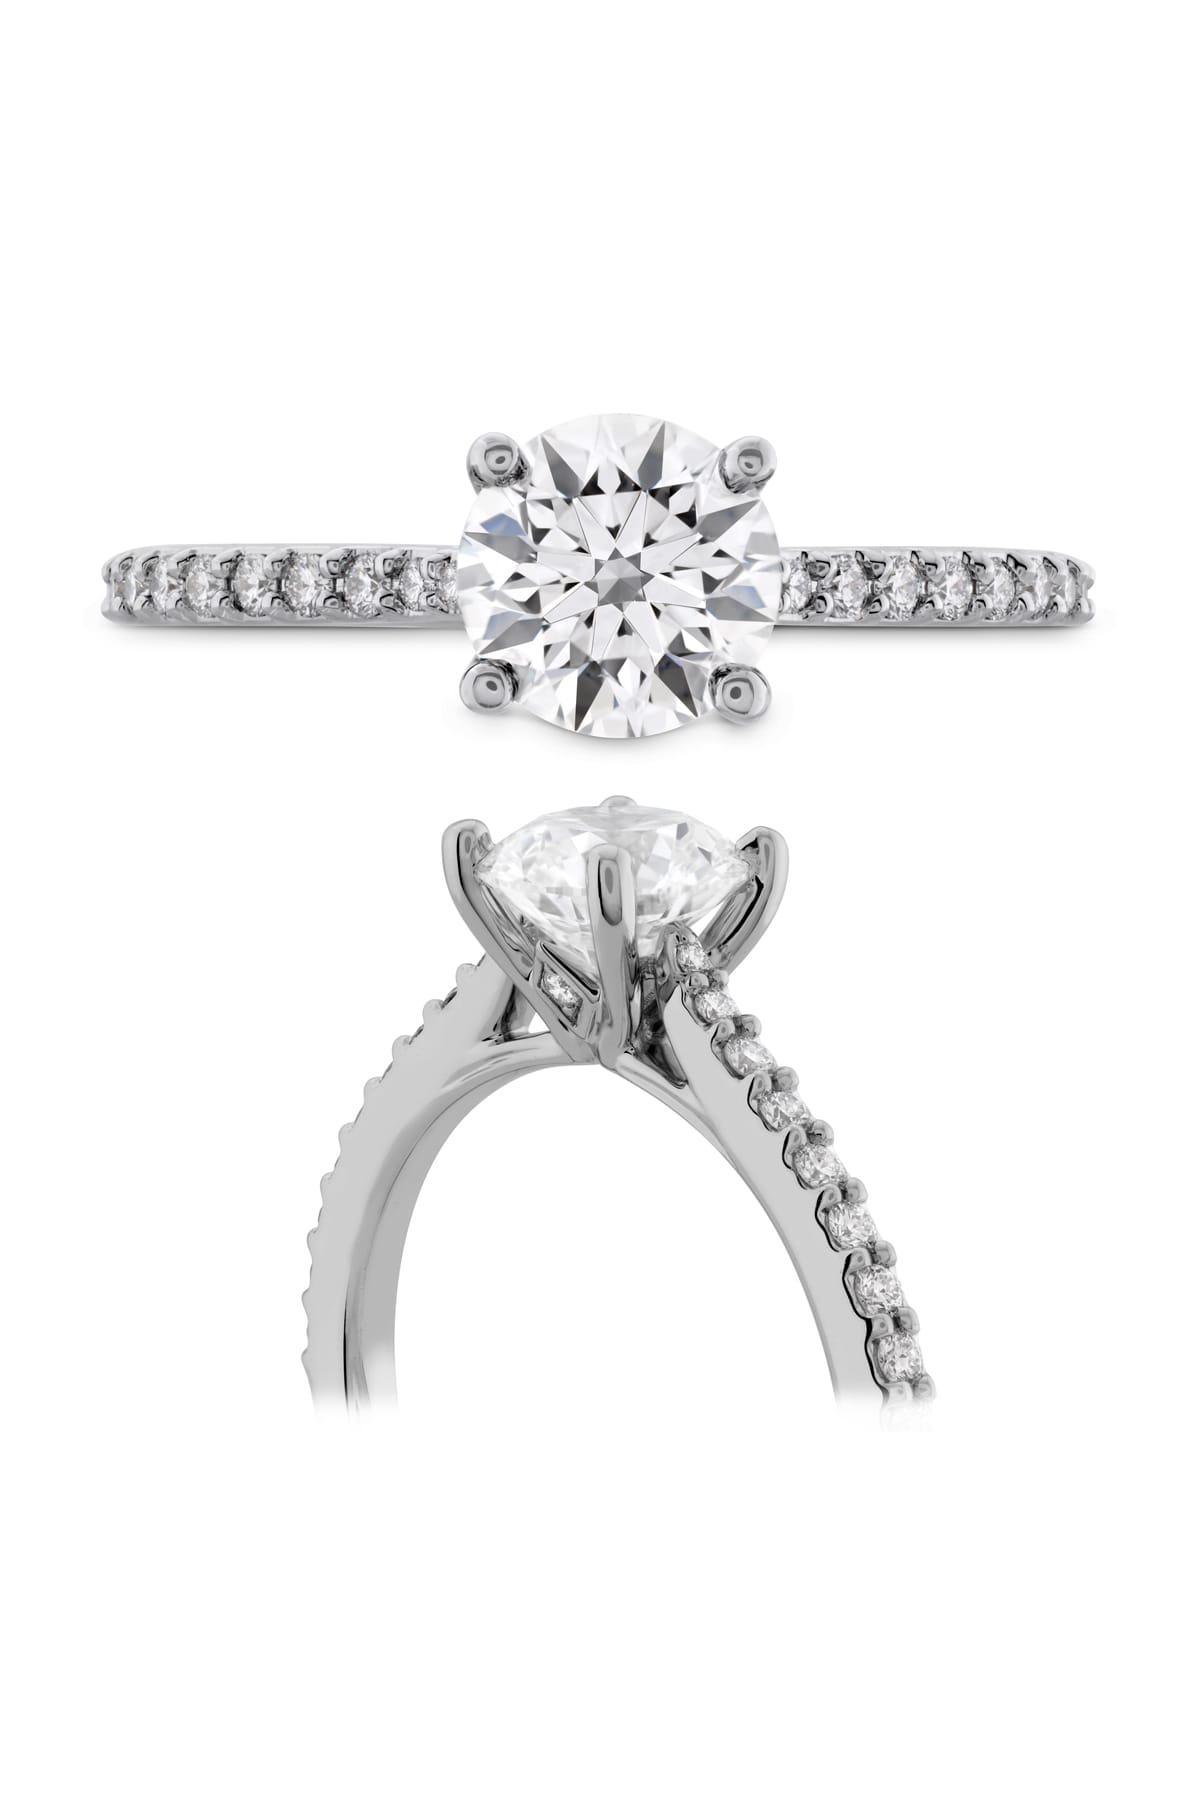 Camilla Engagement Ring From Hearts On Fire available at LeGassick Diamonds and Jewellery Gold Coast, Australia.